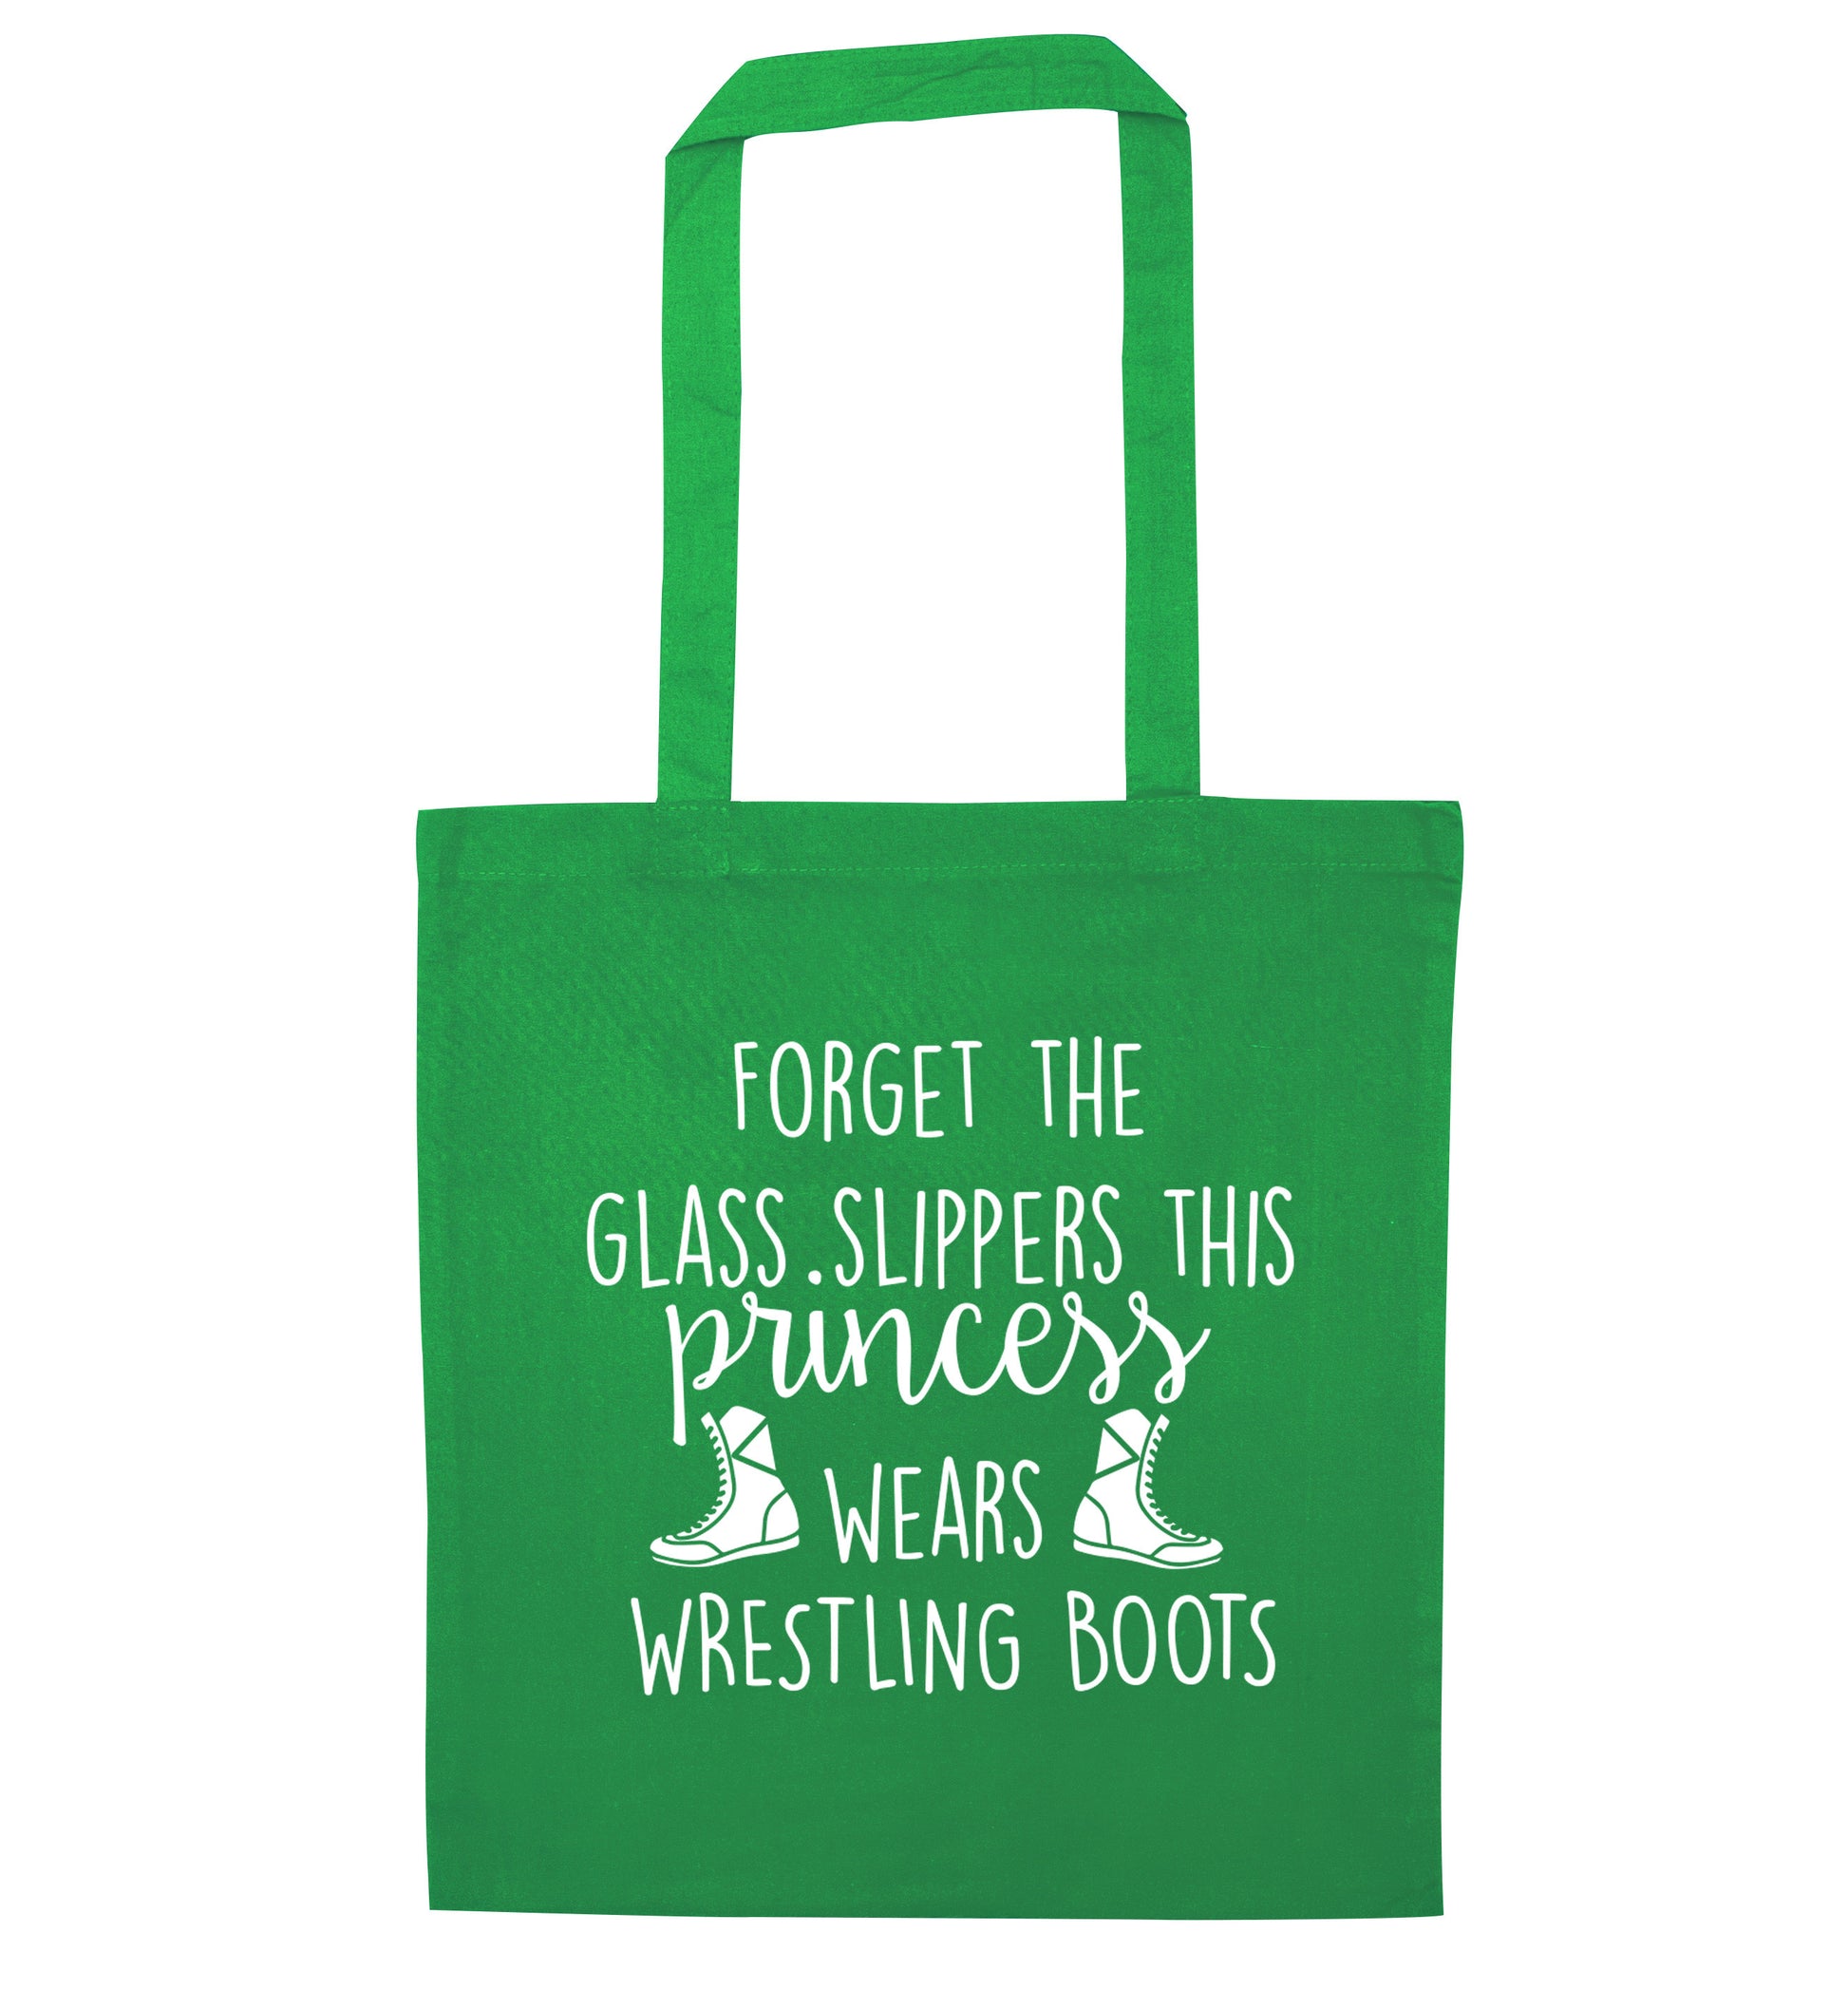 Forget the glass slippers this princess wears wrestling boots green tote bag